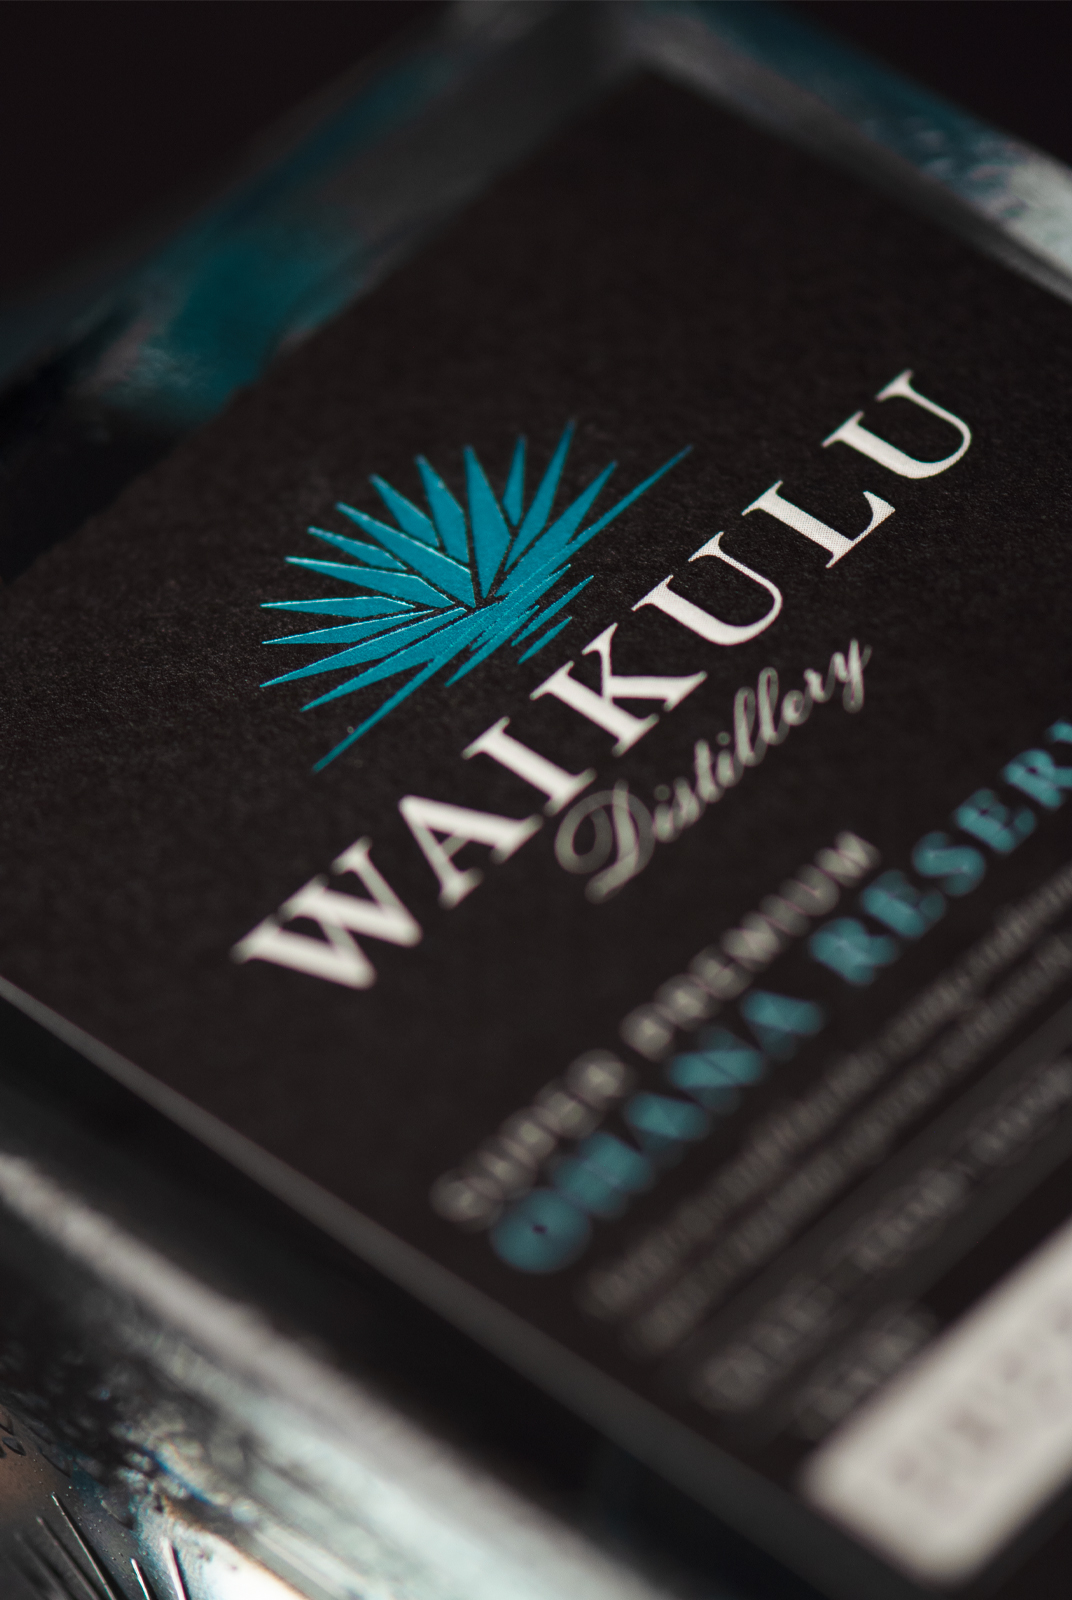 Waikulu Distillery's Unique Agave Spirit Packaging Design: A Blend of Traditional Tequila and Hawaiian Sensibilities